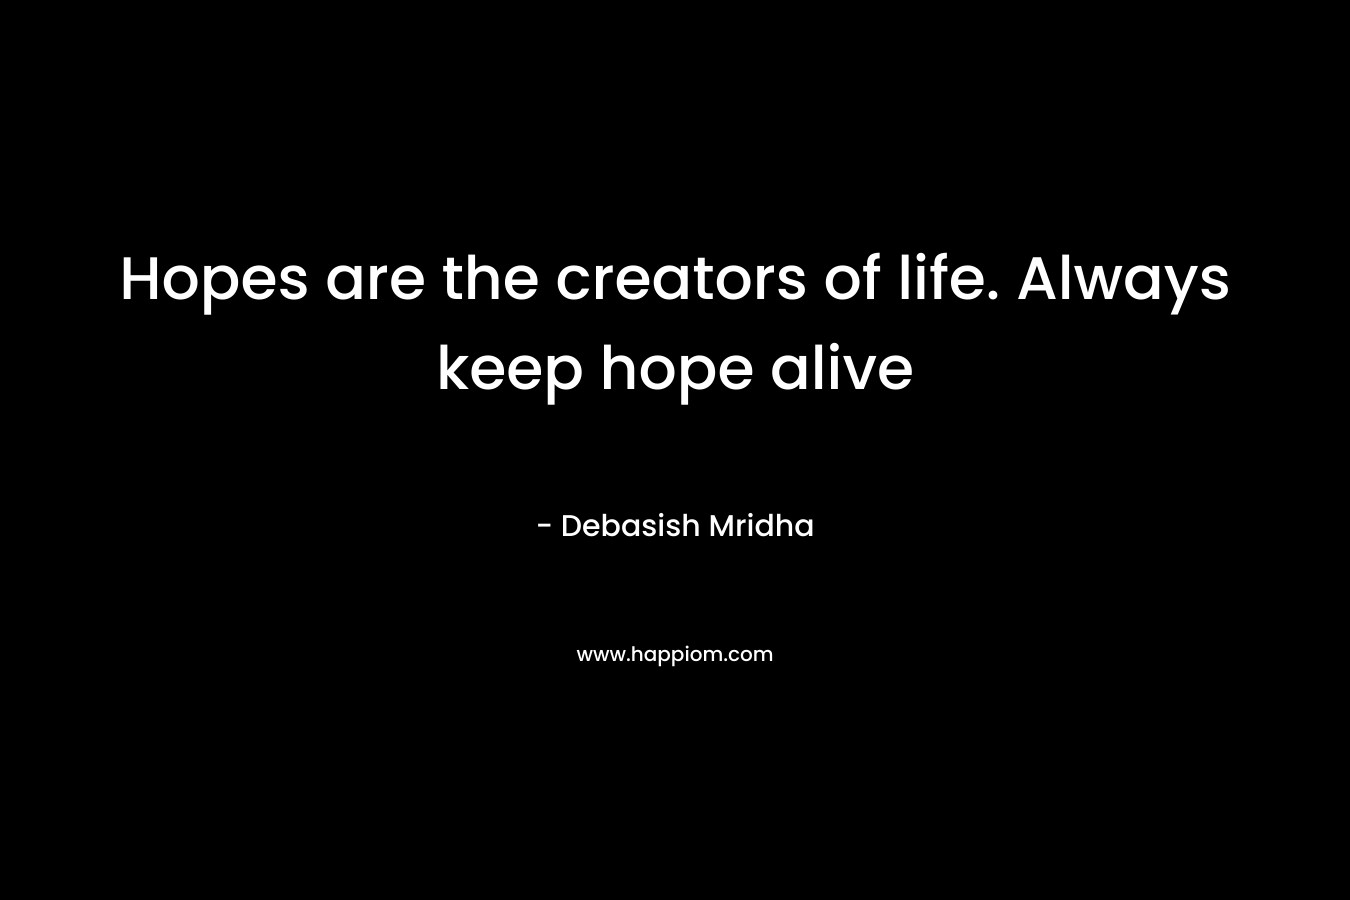 Hopes are the creators of life. Always keep hope alive